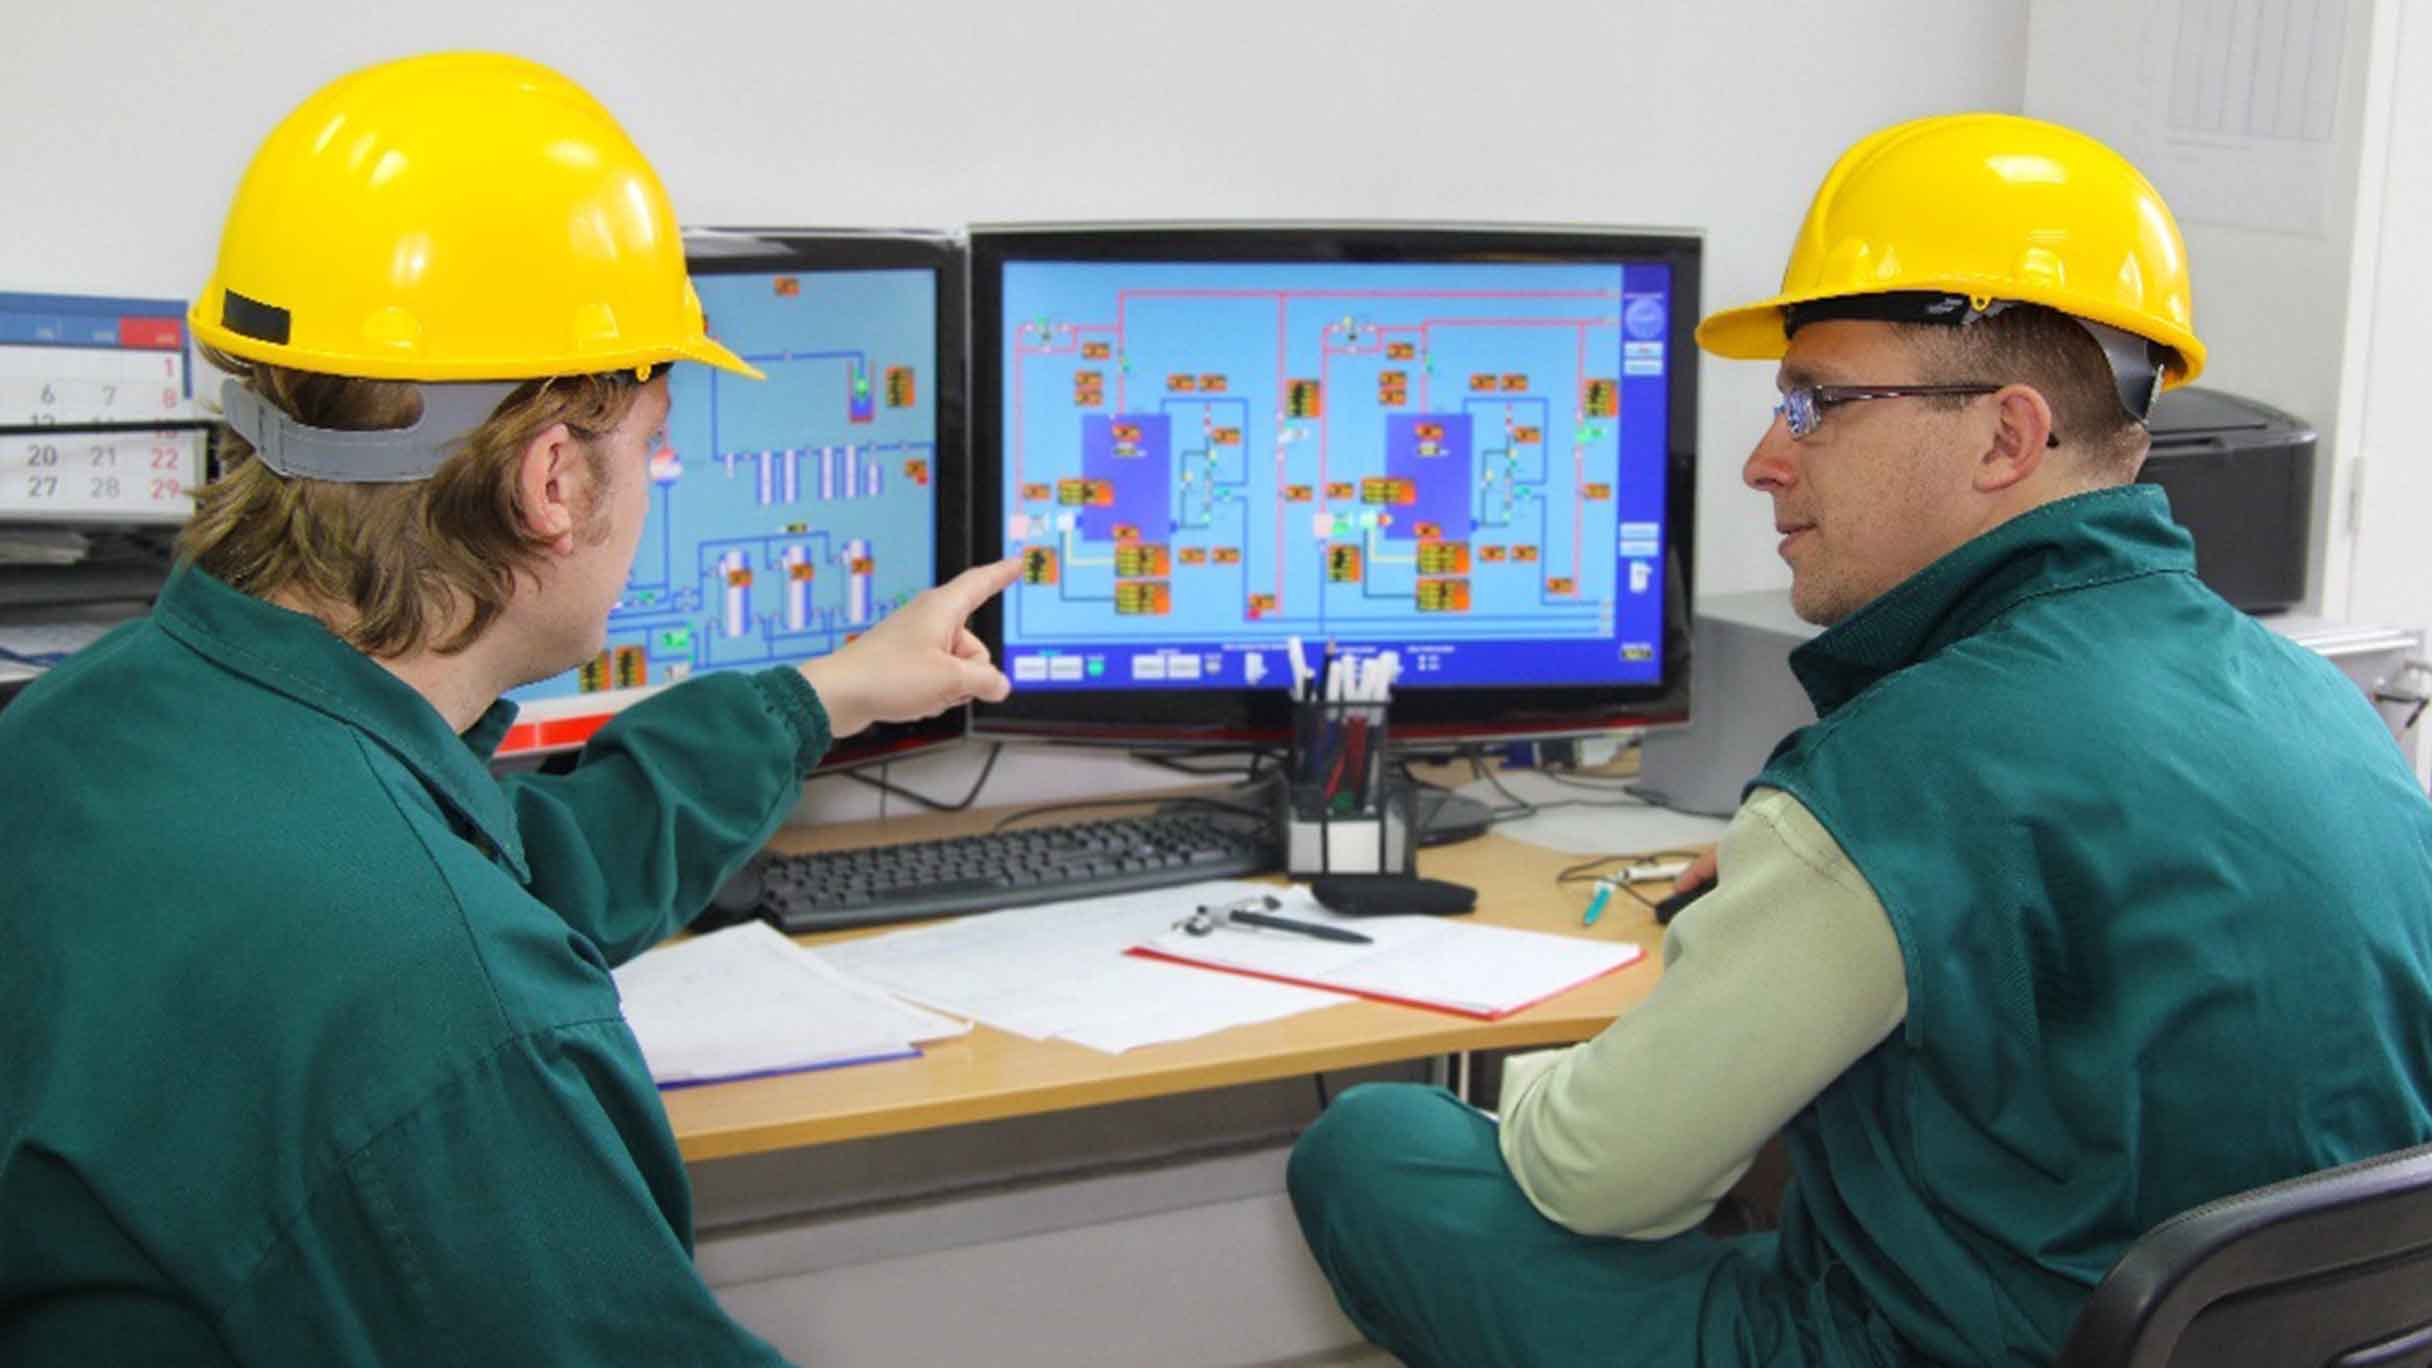 Remote access for HMI/SCADA operations at mining company